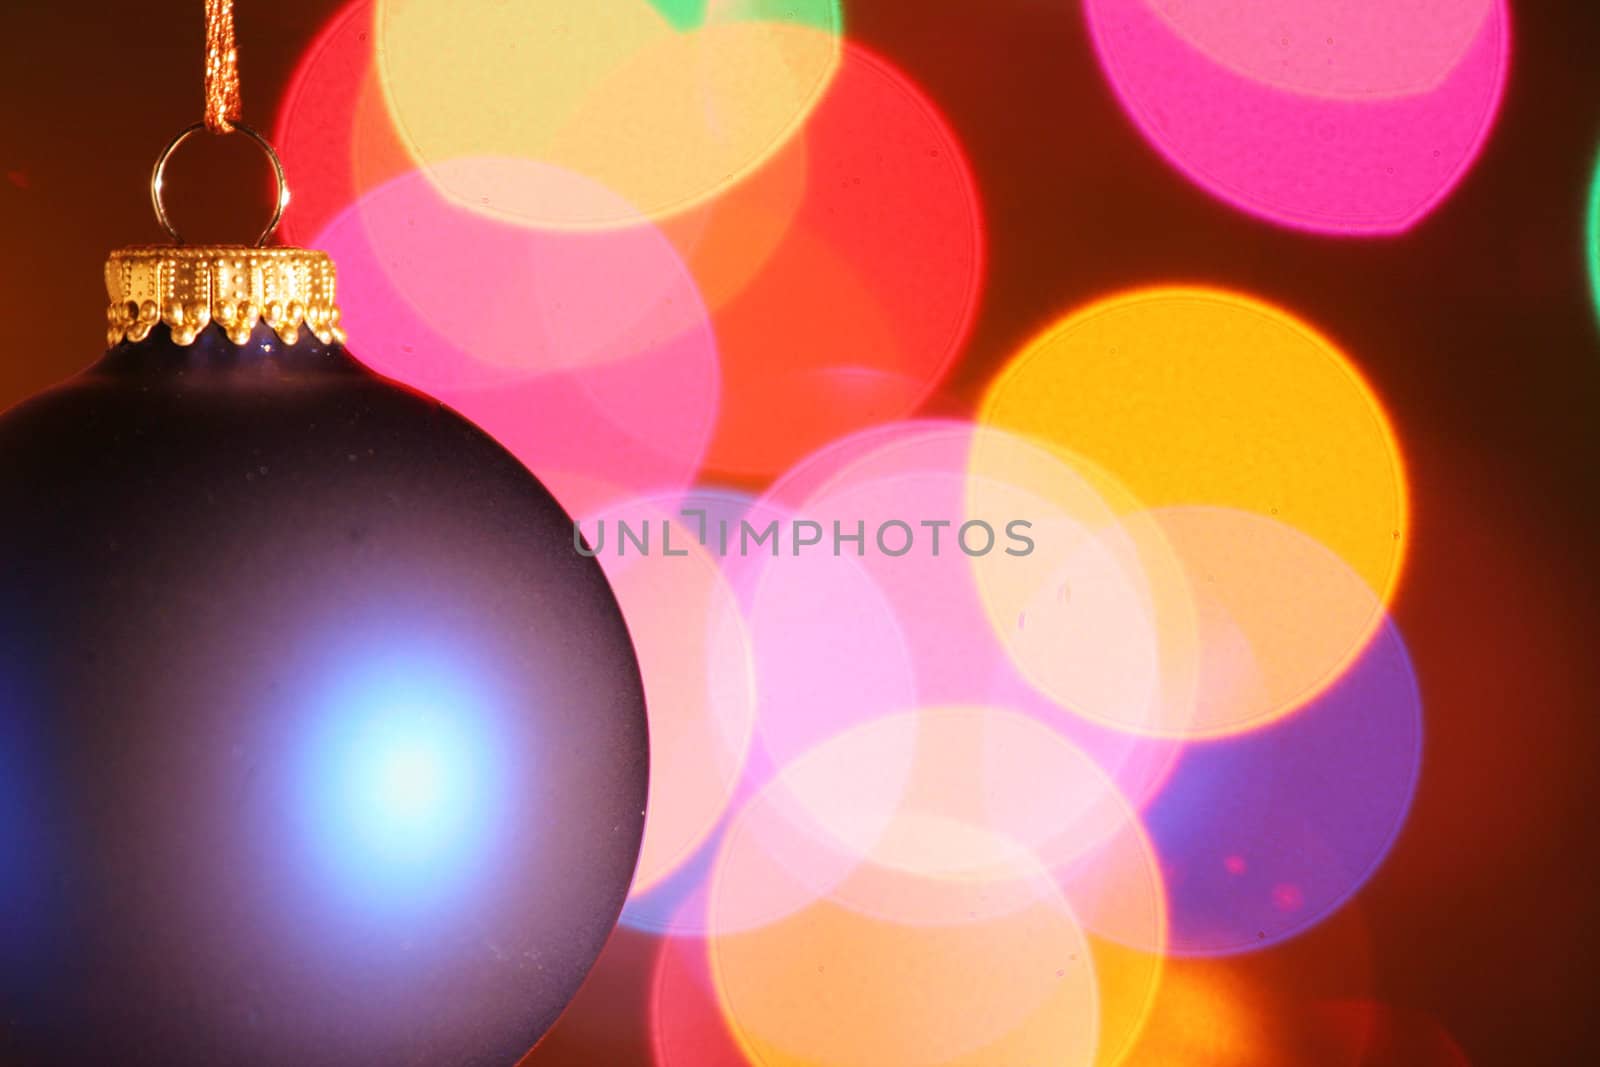 Blue frosted Christmas ornament with colorful lights in background.